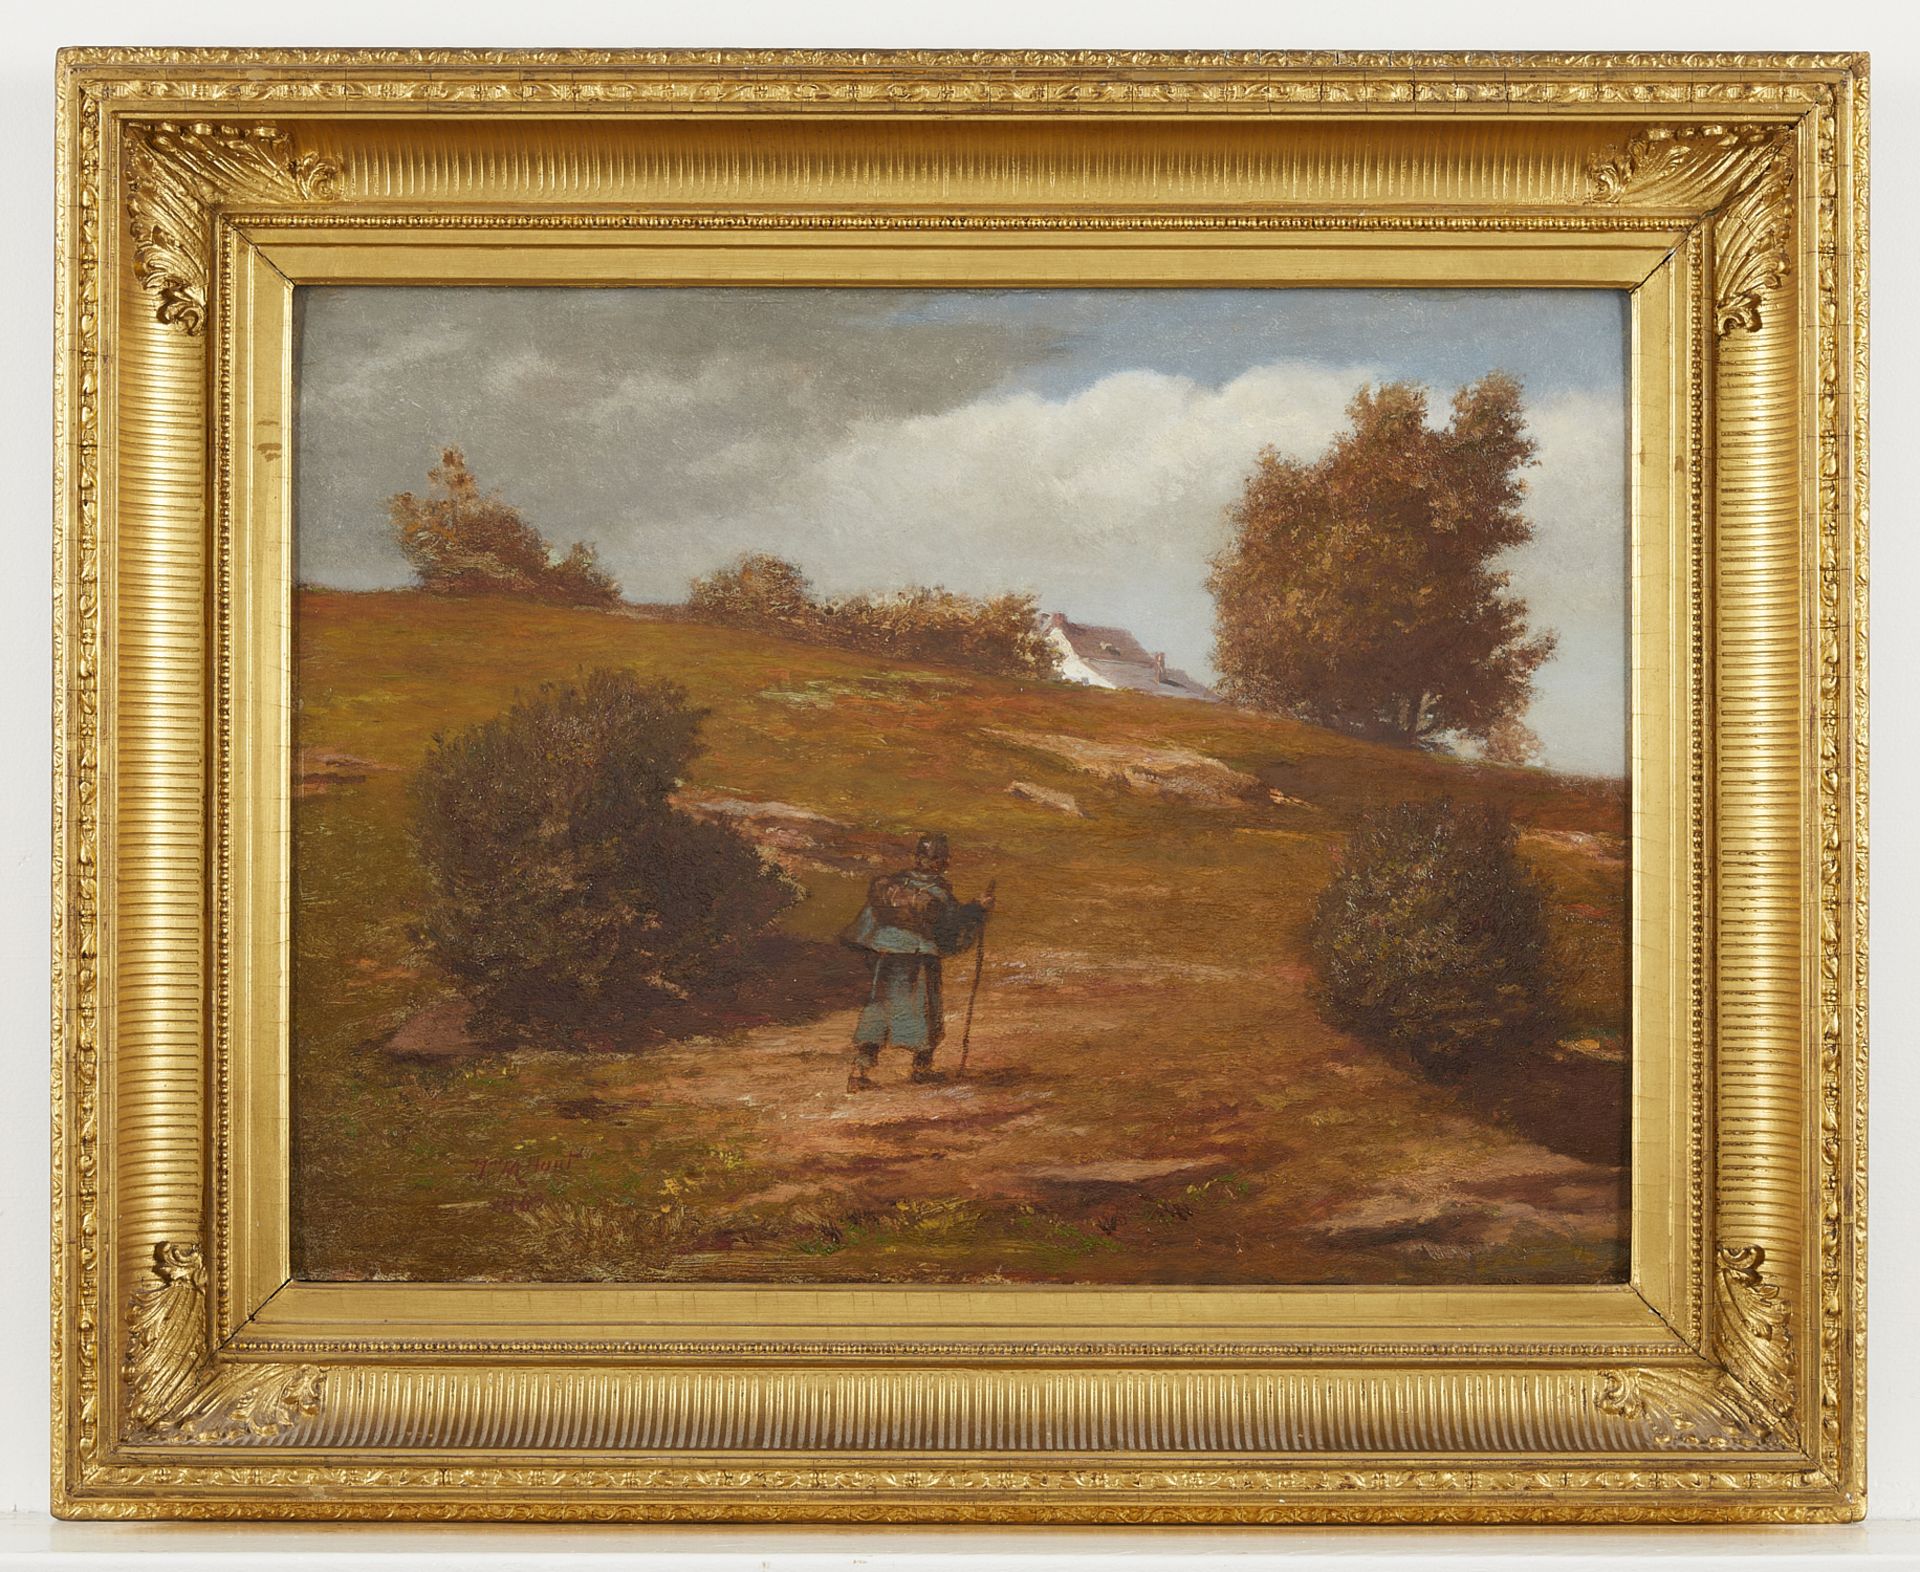 William M. Hunt "Return of the Soldier" Painting - Image 3 of 8